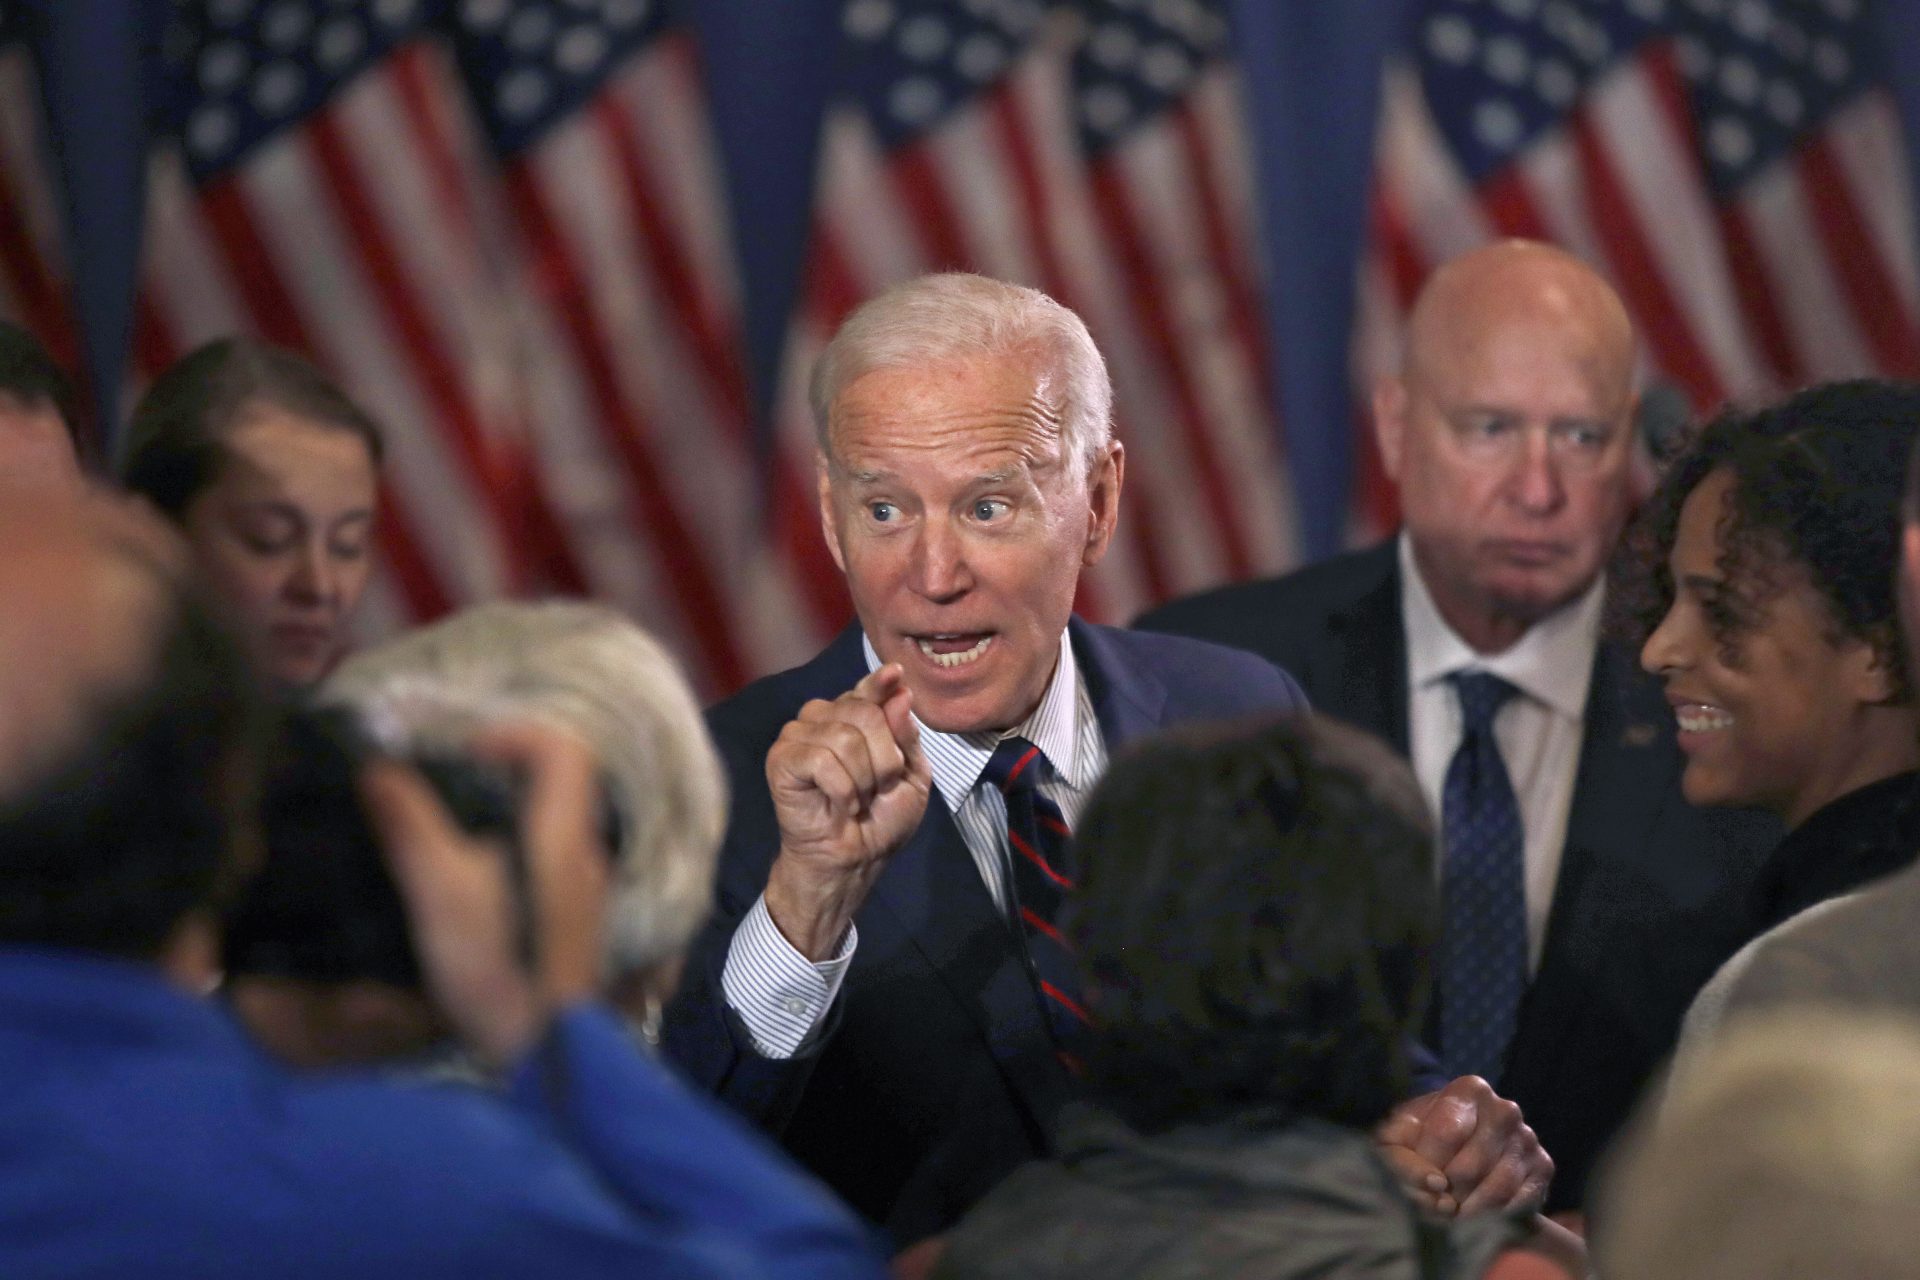 Democratic presidential candidate and former Vice President Joe Biden speaks to people at a campaign event, Wednesday, Oct. 9, 2019, in Rochester, N.H.